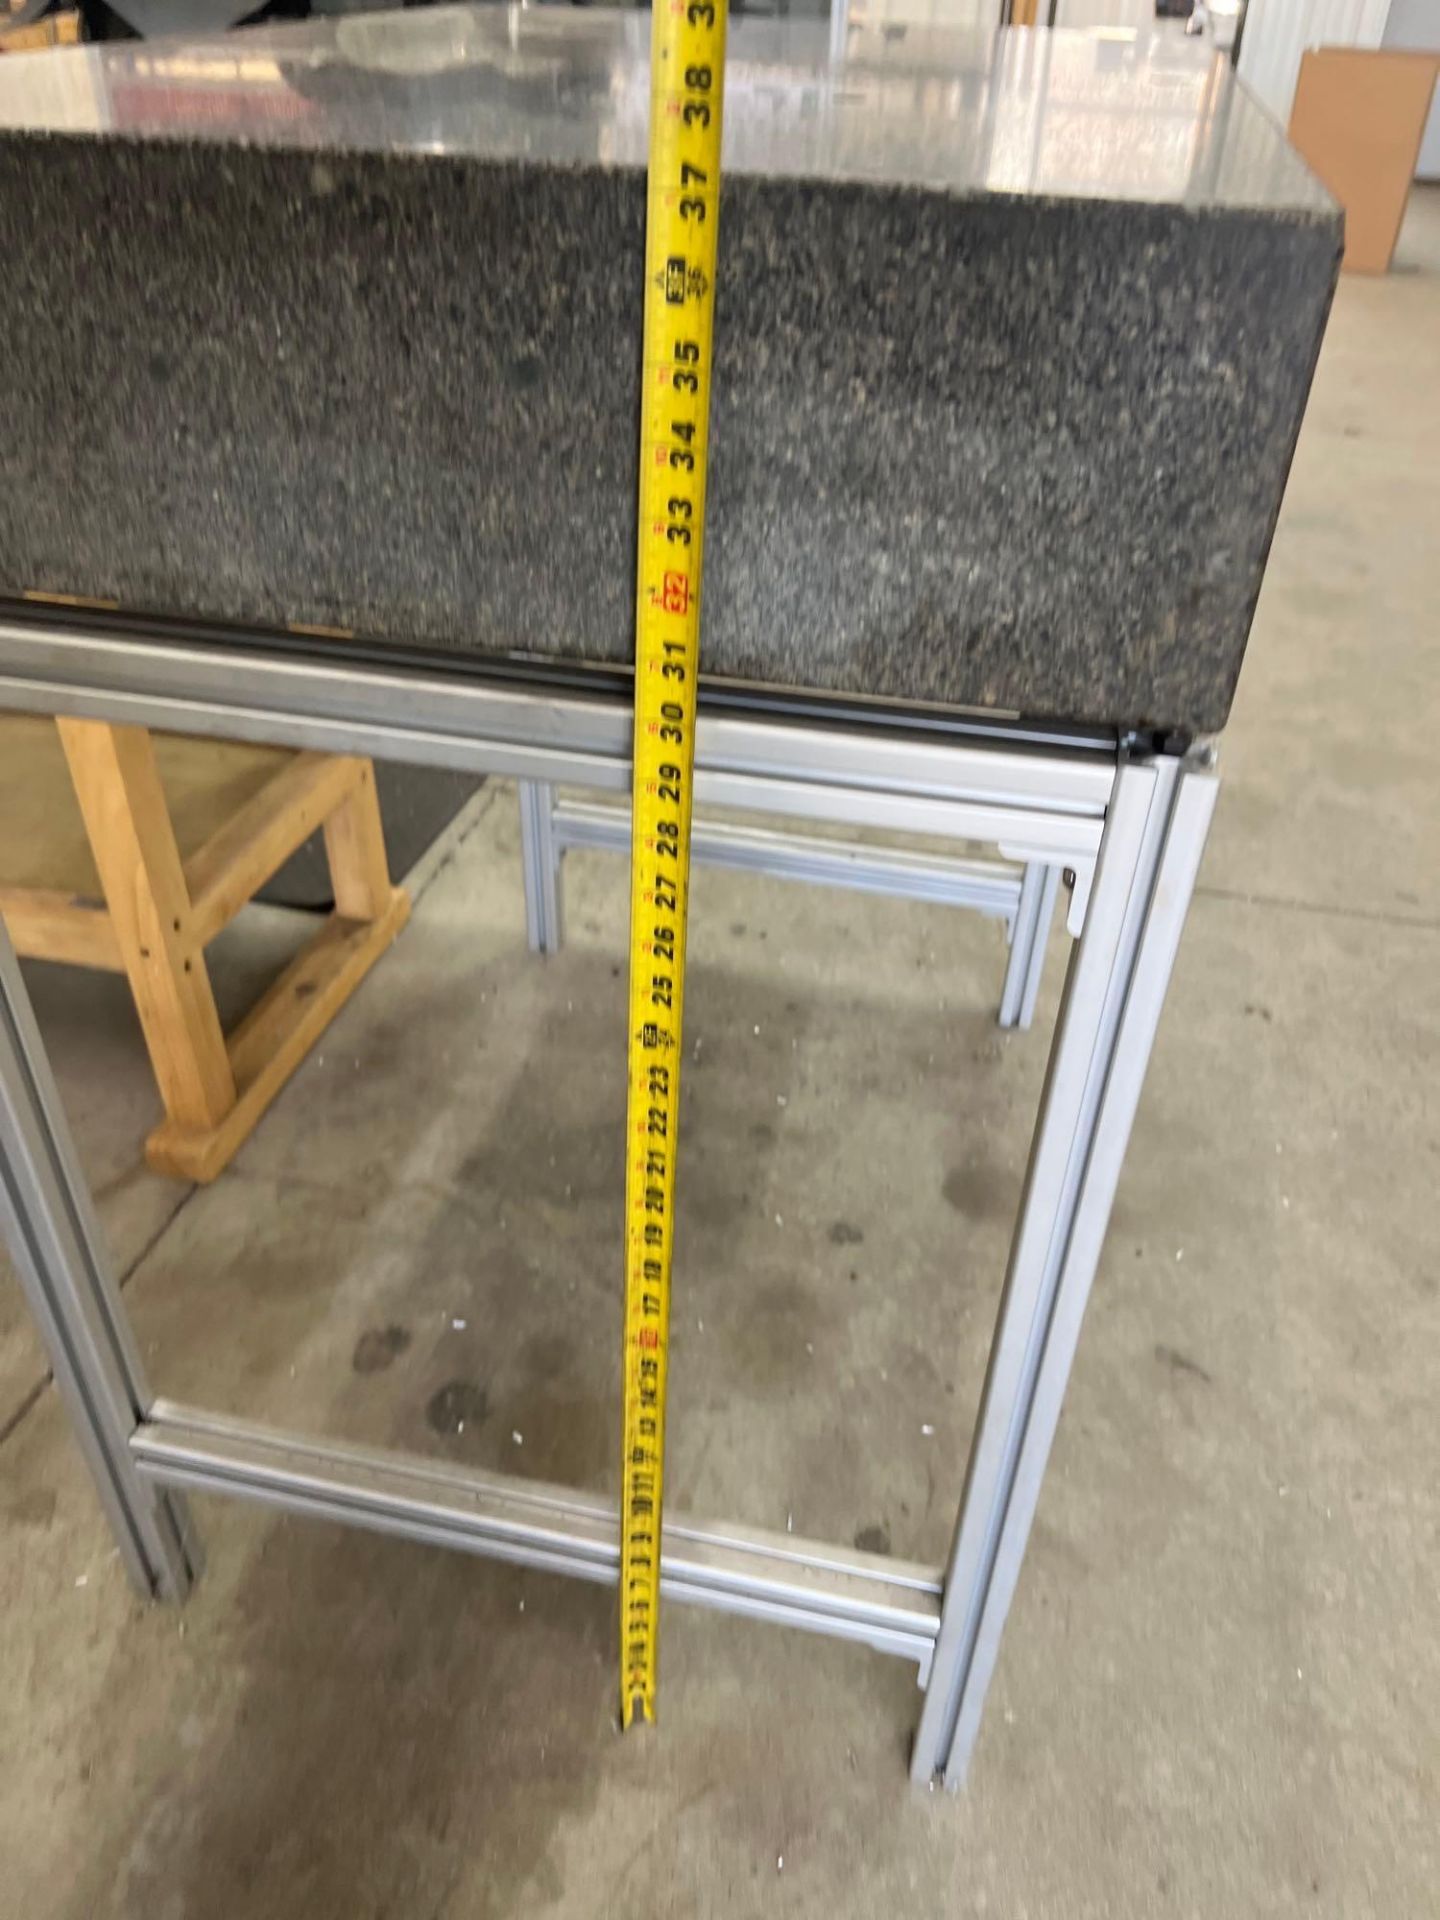 36"x24"x6" Granite Inspection Plate w/Stand - Image 8 of 8